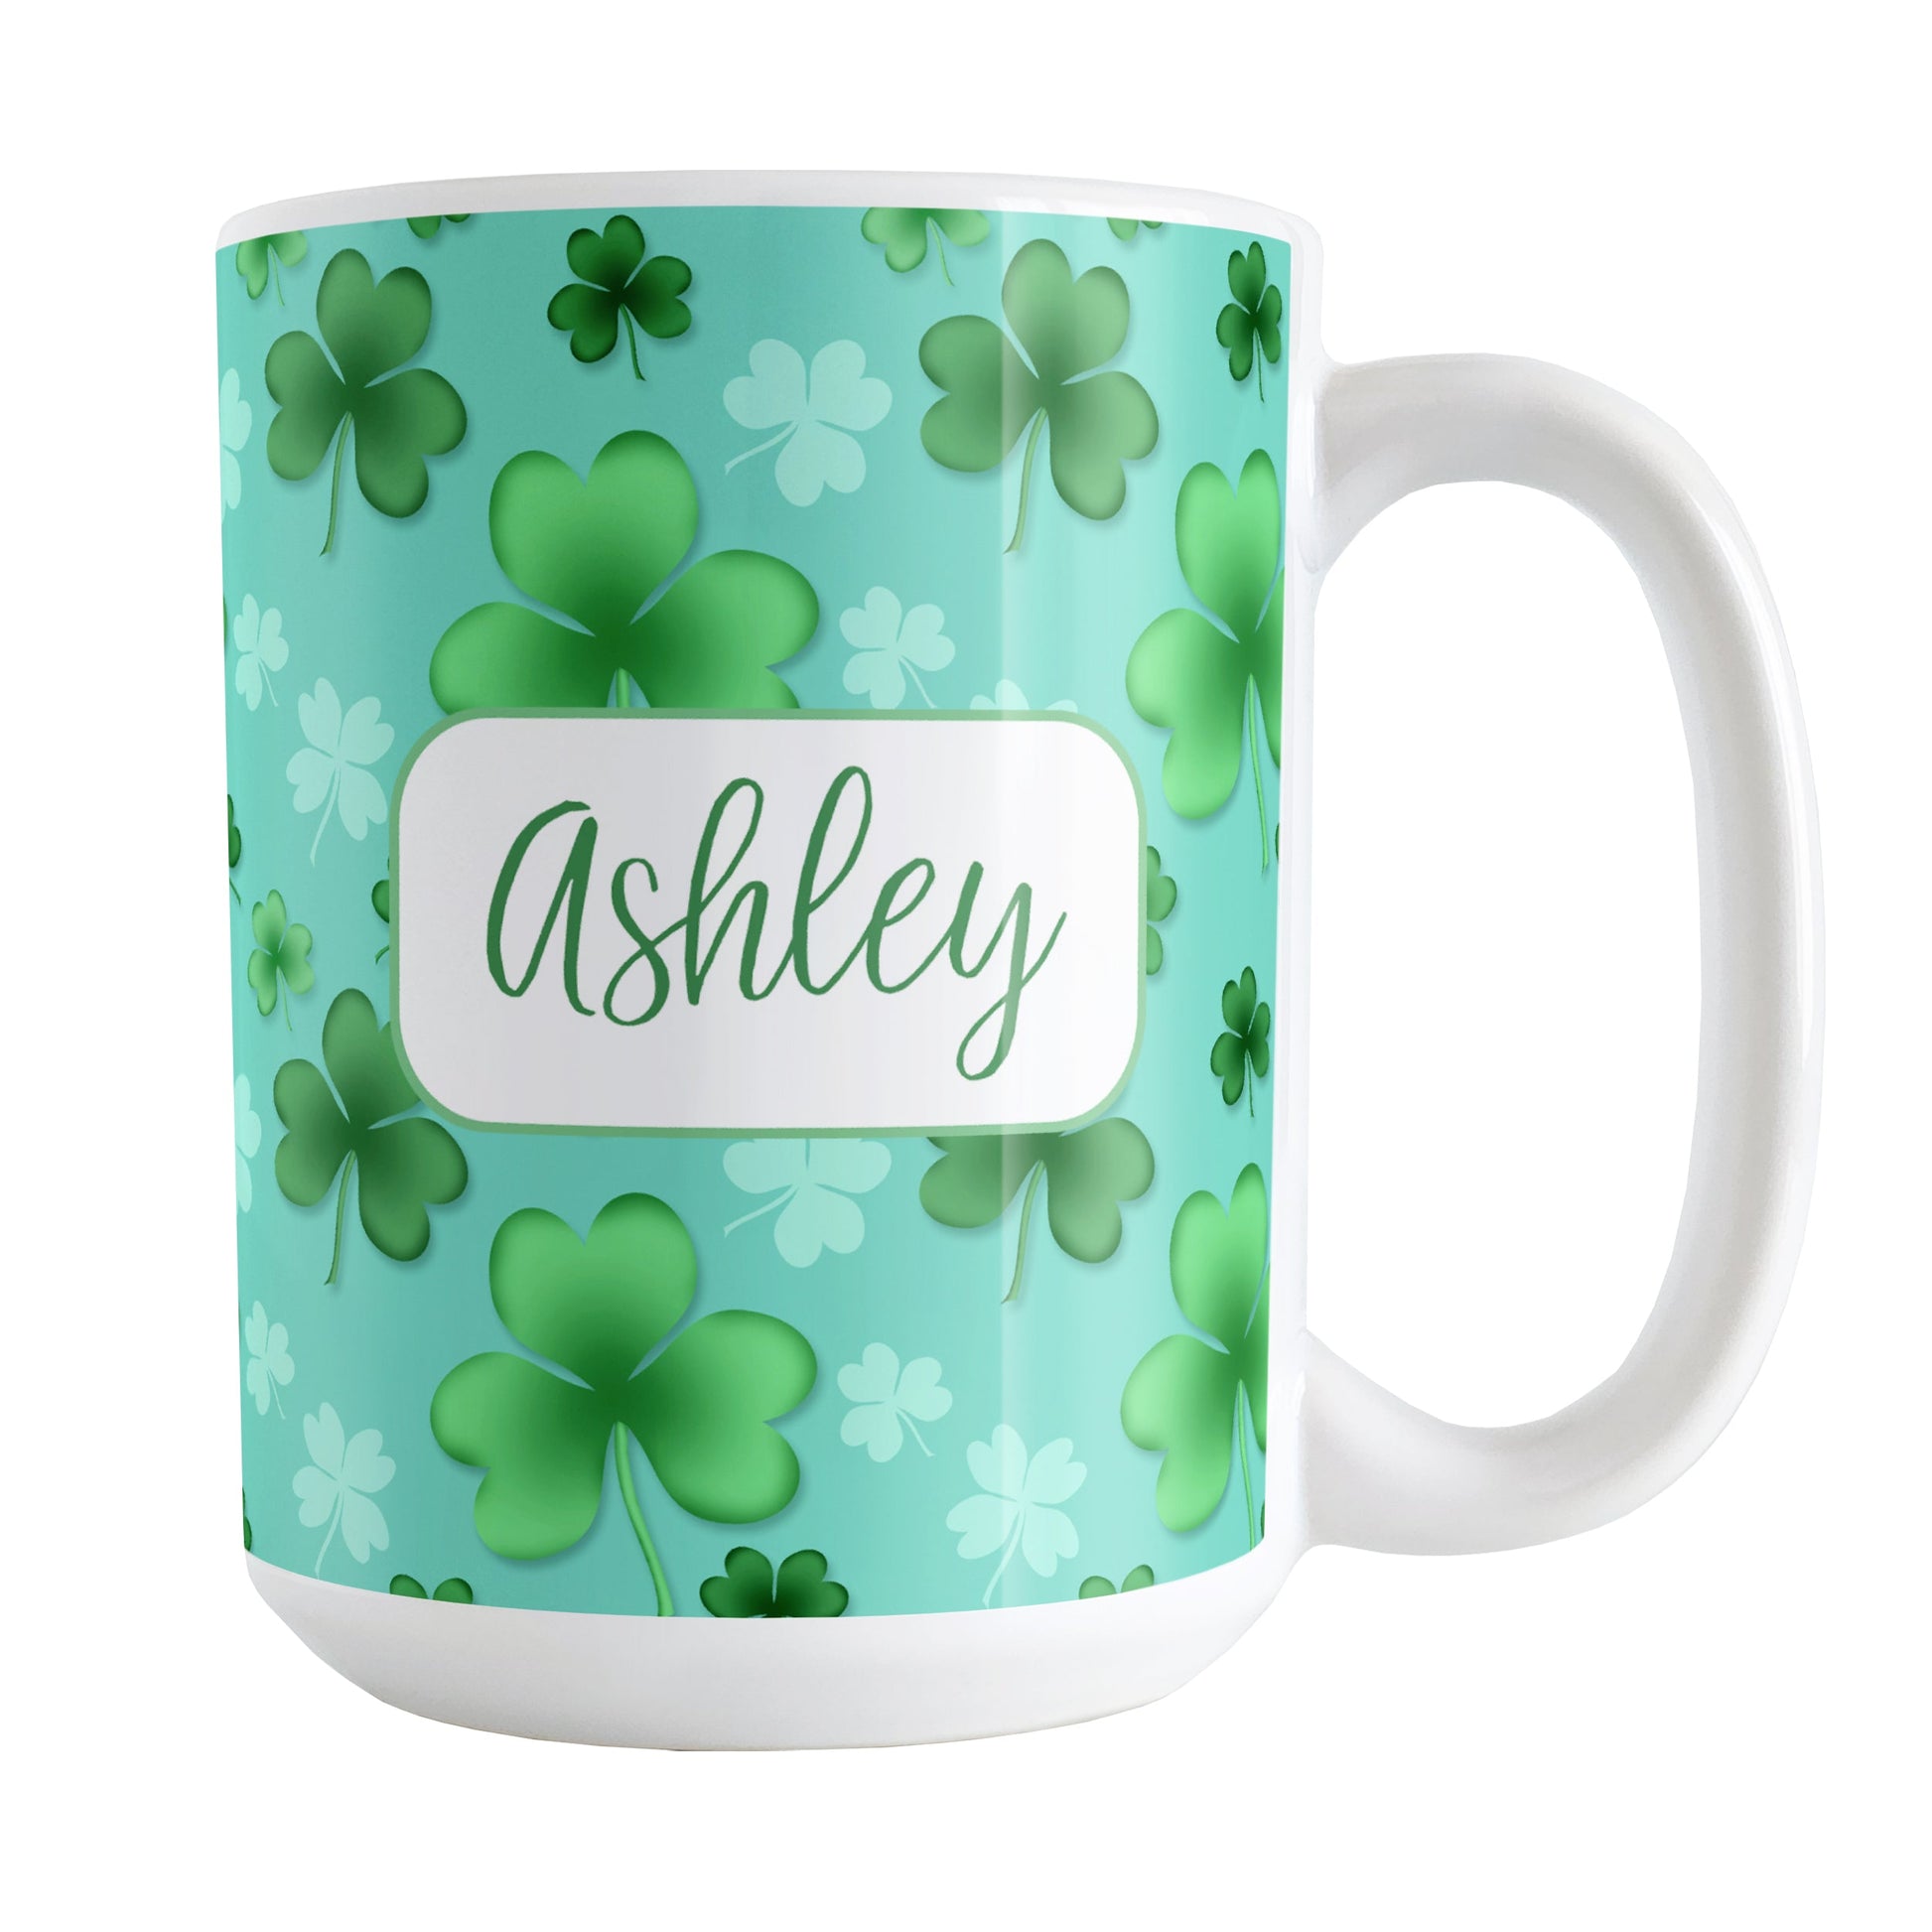 Personalized Lucky Clover Pattern Teal and Green Mug (15oz) at Amy's Coffee Mugs. A ceramic coffee mug designed with a lucky green clover pattern with a 4-leaf clover among 3-leaf clovers, in different shades of green, over a teal background that wraps around the mug to the handle. Your name is personalized in green on white, over the lucky clover pattern.